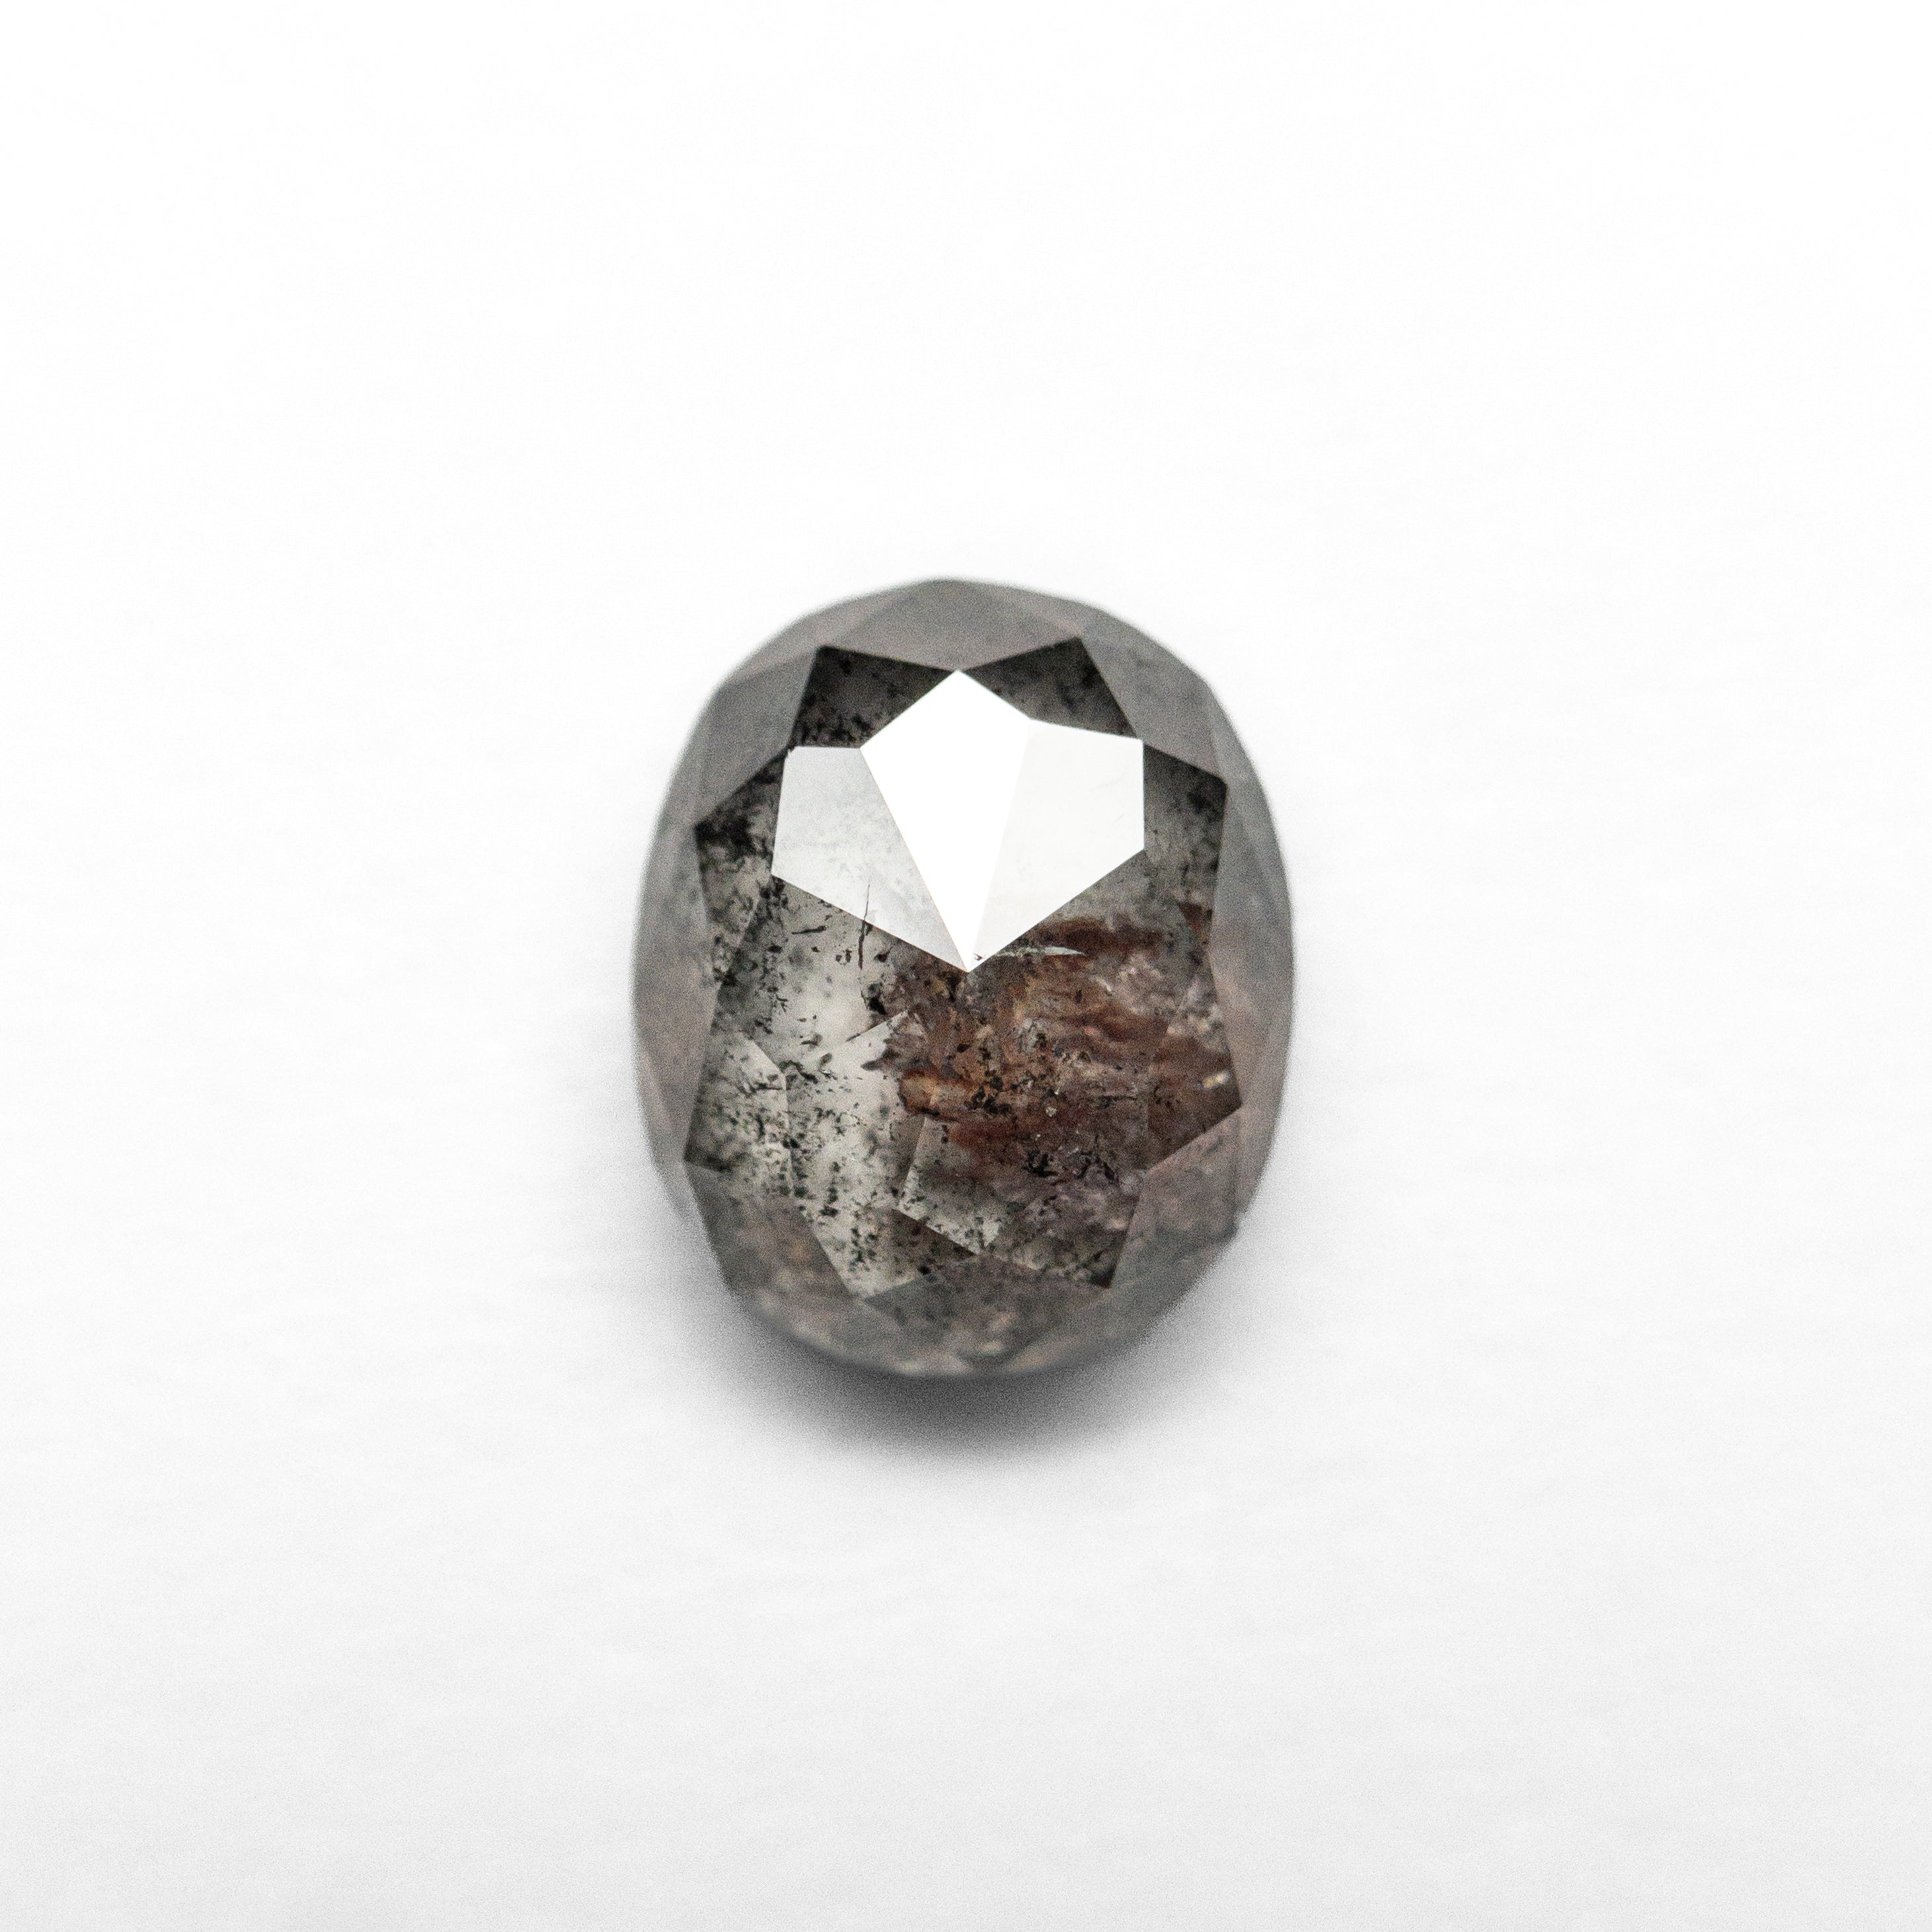 1.47ct 6.95x5.77x3.72mm Oval Double Cut 23838-11